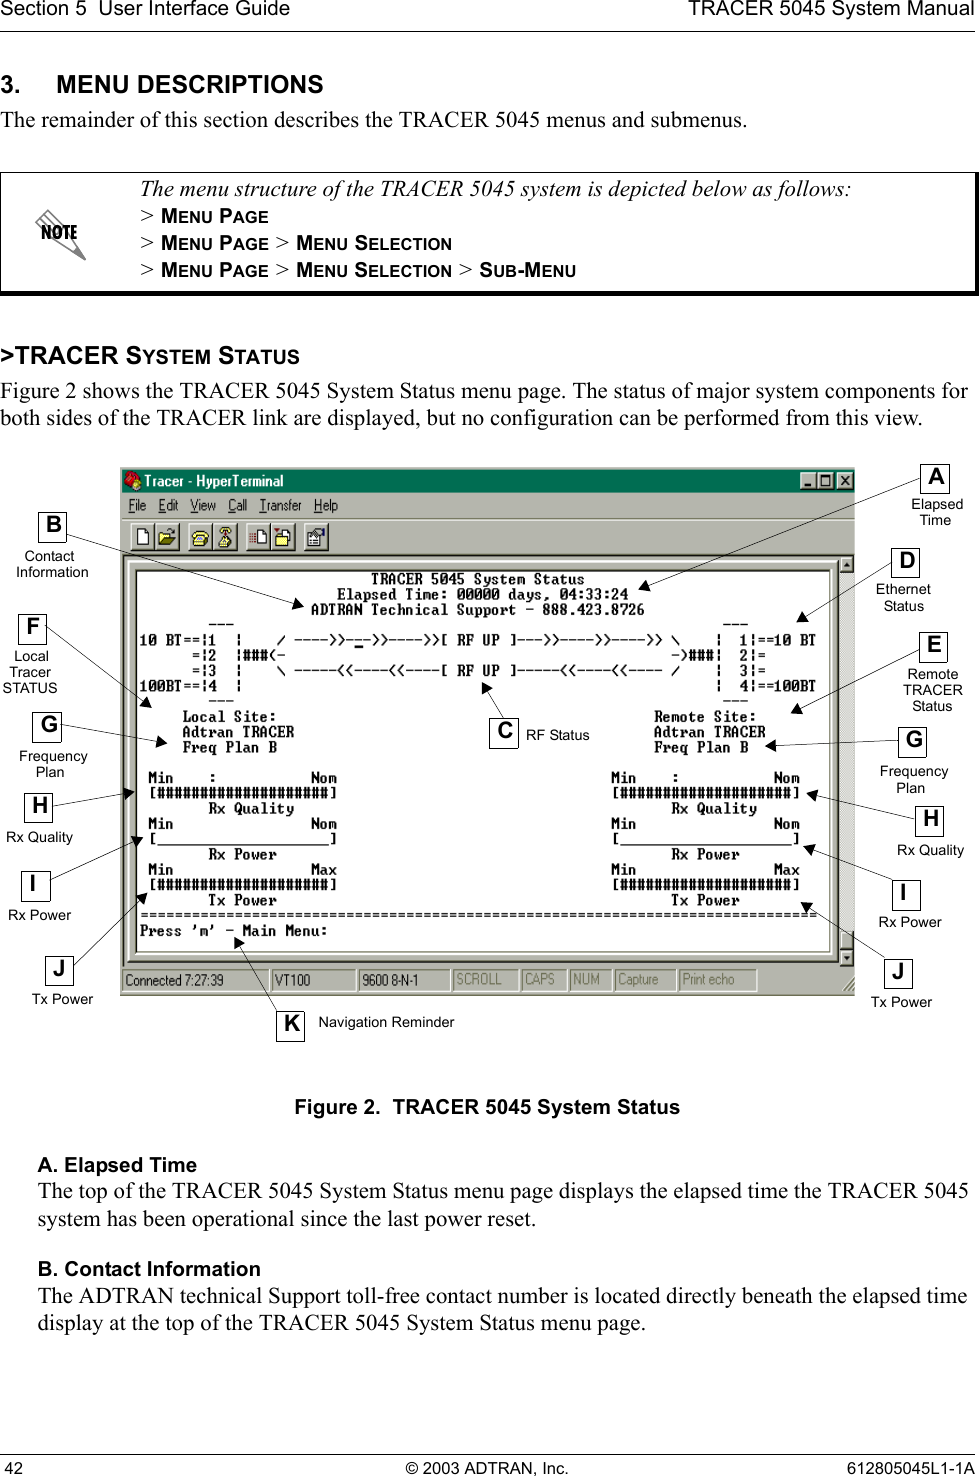 Section 5  User Interface Guide TRACER 5045 System Manual 42 © 2003 ADTRAN, Inc. 612805045L1-1A3. MENU DESCRIPTIONSThe remainder of this section describes the TRACER 5045 menus and submenus. &gt;TRACER SYSTEM STATUSFigure 2 shows the TRACER 5045 System Status menu page. The status of major system components for both sides of the TRACER link are displayed, but no configuration can be performed from this view.Figure 2.  TRACER 5045 System StatusA. Elapsed TimeThe top of the TRACER 5045 System Status menu page displays the elapsed time the TRACER 5045 system has been operational since the last power reset.B. Contact InformationThe ADTRAN technical Support toll-free contact number is located directly beneath the elapsed time display at the top of the TRACER 5045 System Status menu page.The menu structure of the TRACER 5045 system is depicted below as follows:&gt; MENU PAGE&gt; MENU PAGE &gt; MENU SELECTION&gt; MENU PAGE &gt; MENU SELECTION &gt; SUB-MENUAElapsedTimeBContactInformationFLocalGFrequencyIRx PowerCRF StatusDEthernetERemoteGIRx PowerJTx PowerJTx PowerKNavigation ReminderStatus TracerSTATUSPlan FrequencyPlanTRACERStatusHRx QualityHRx Quality